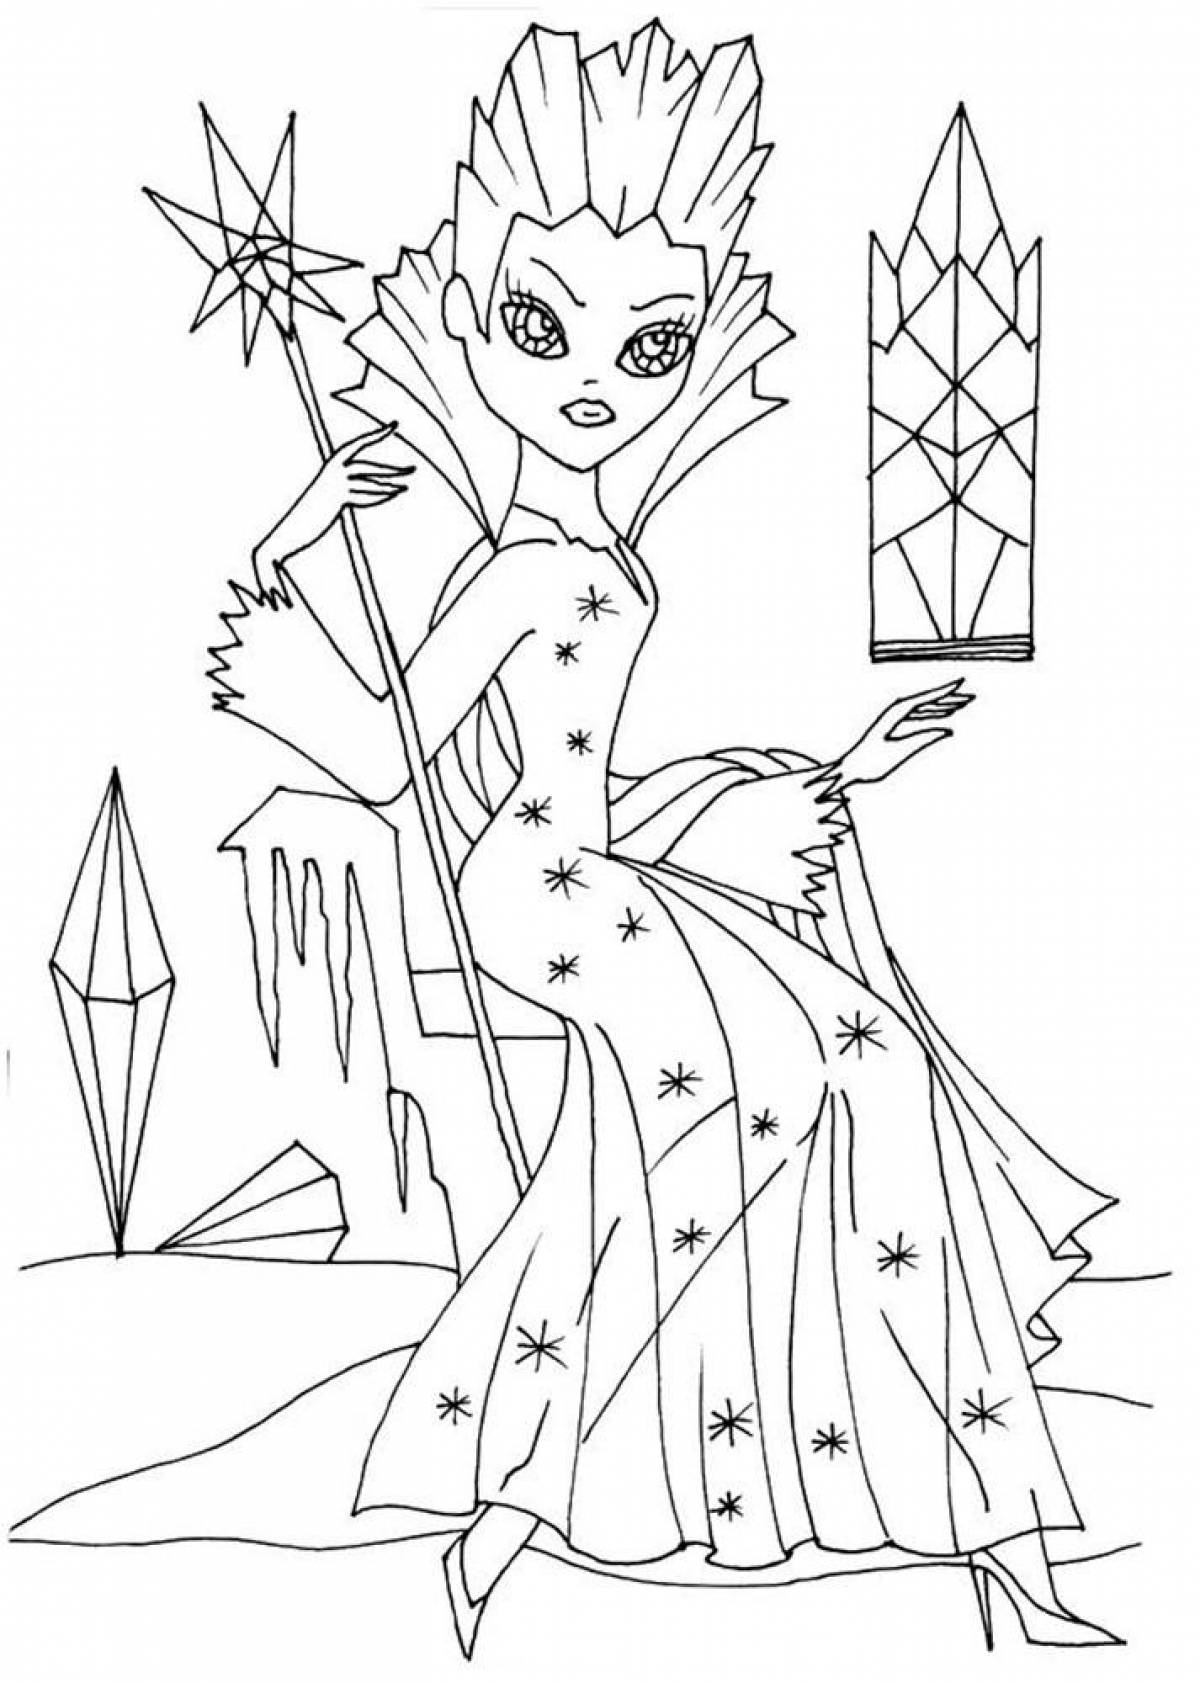 Wonderful snow queen coloring book for kids